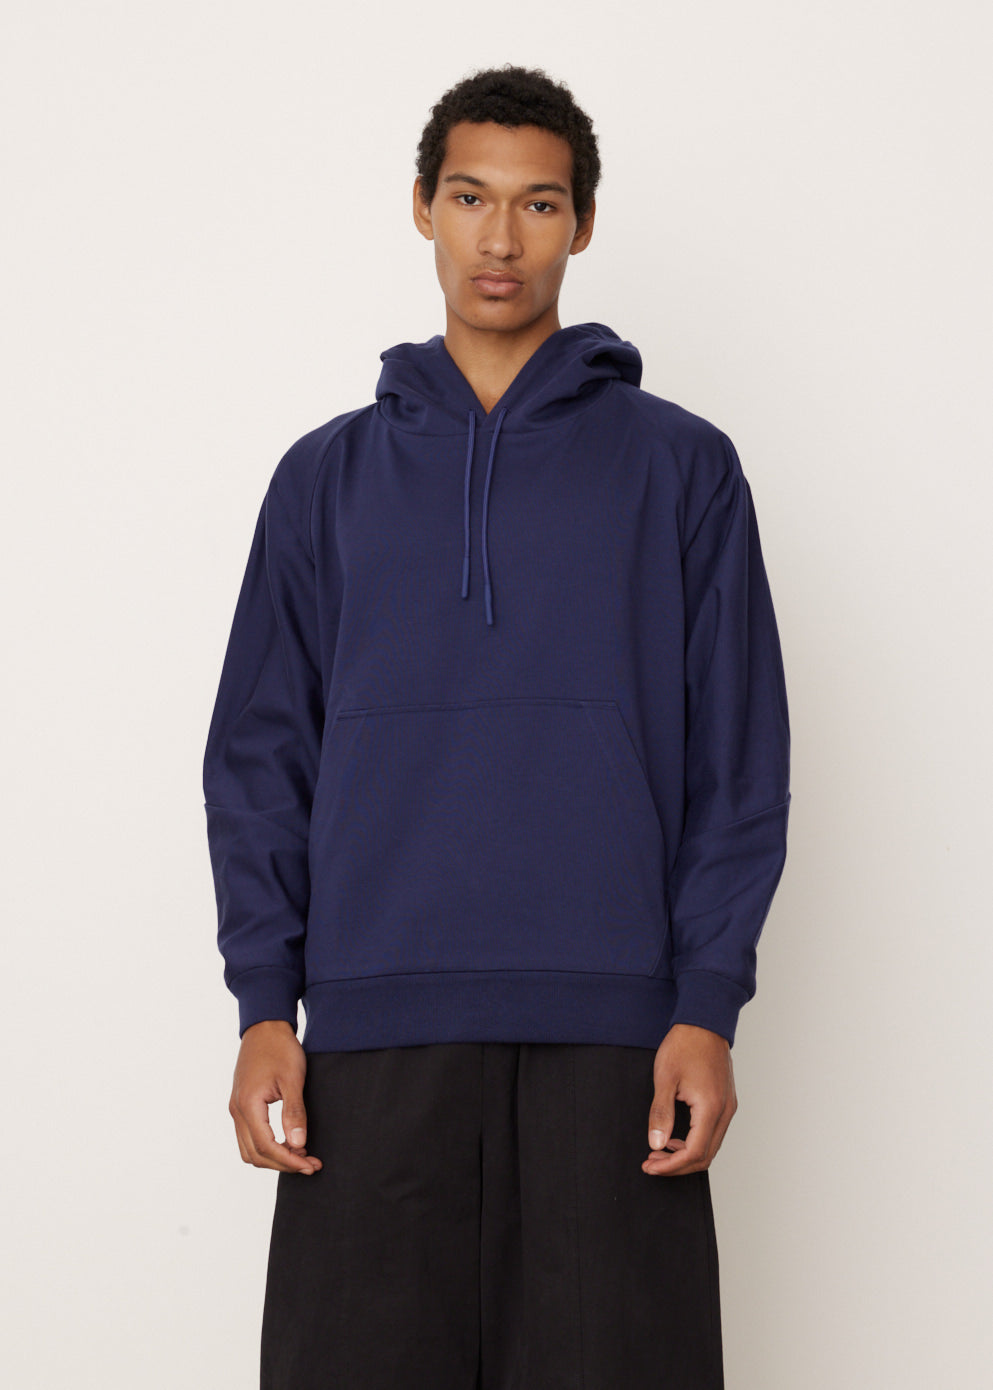 ESC Knit Pullover Hoodie